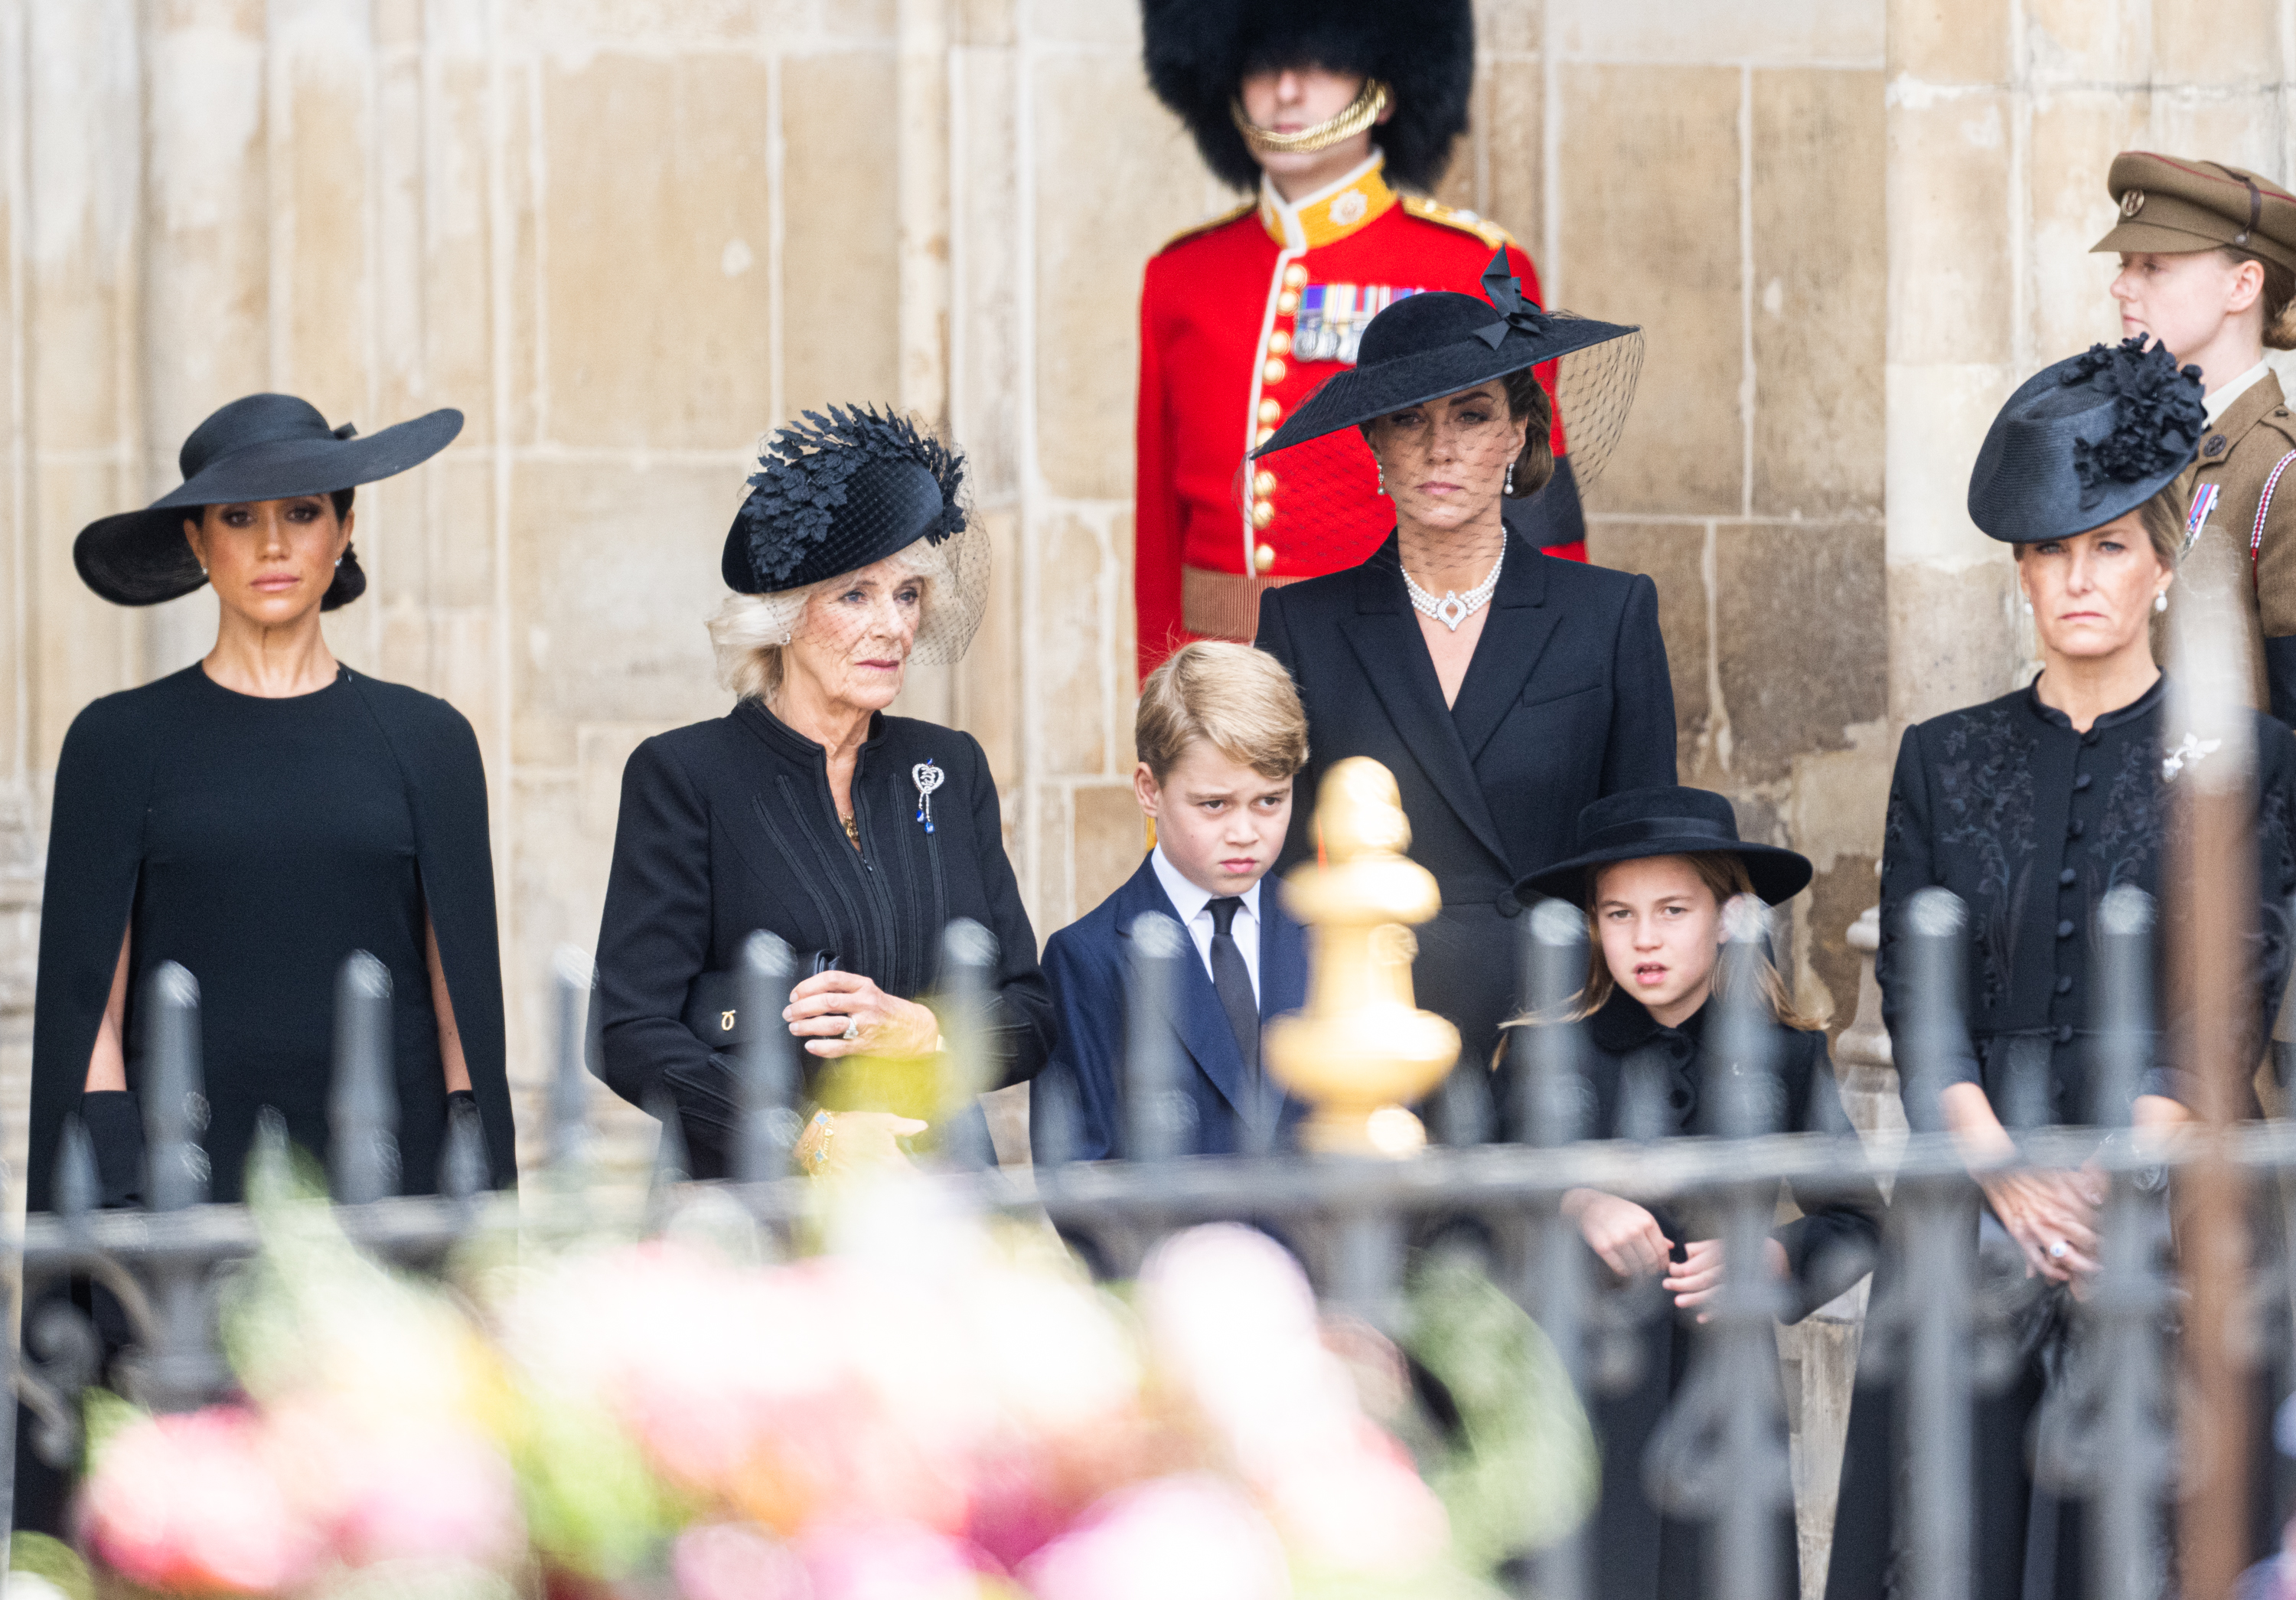 Meghan Markle, Queen Camilla, Prince George, Princess Charlotte, Princess Catherine, and Countess Sophie at the State Funeral of Queen Elizabeth II at Westminster Abbey on September 19, 2022 in London, England | Source: Getty Images